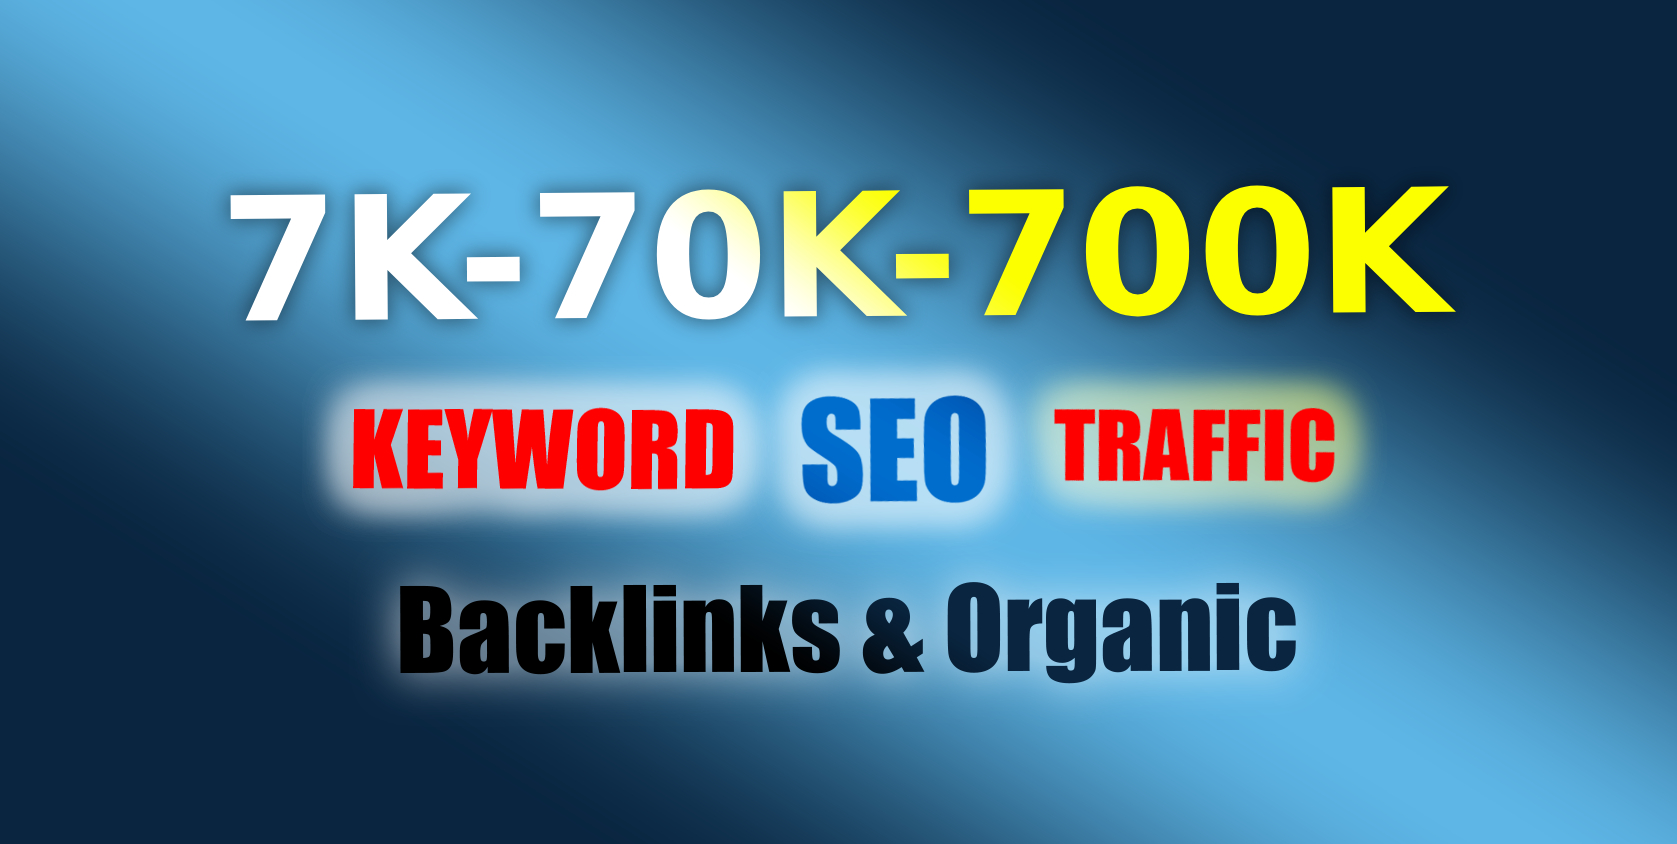 To provide backlinks and organic traffic for website keywords